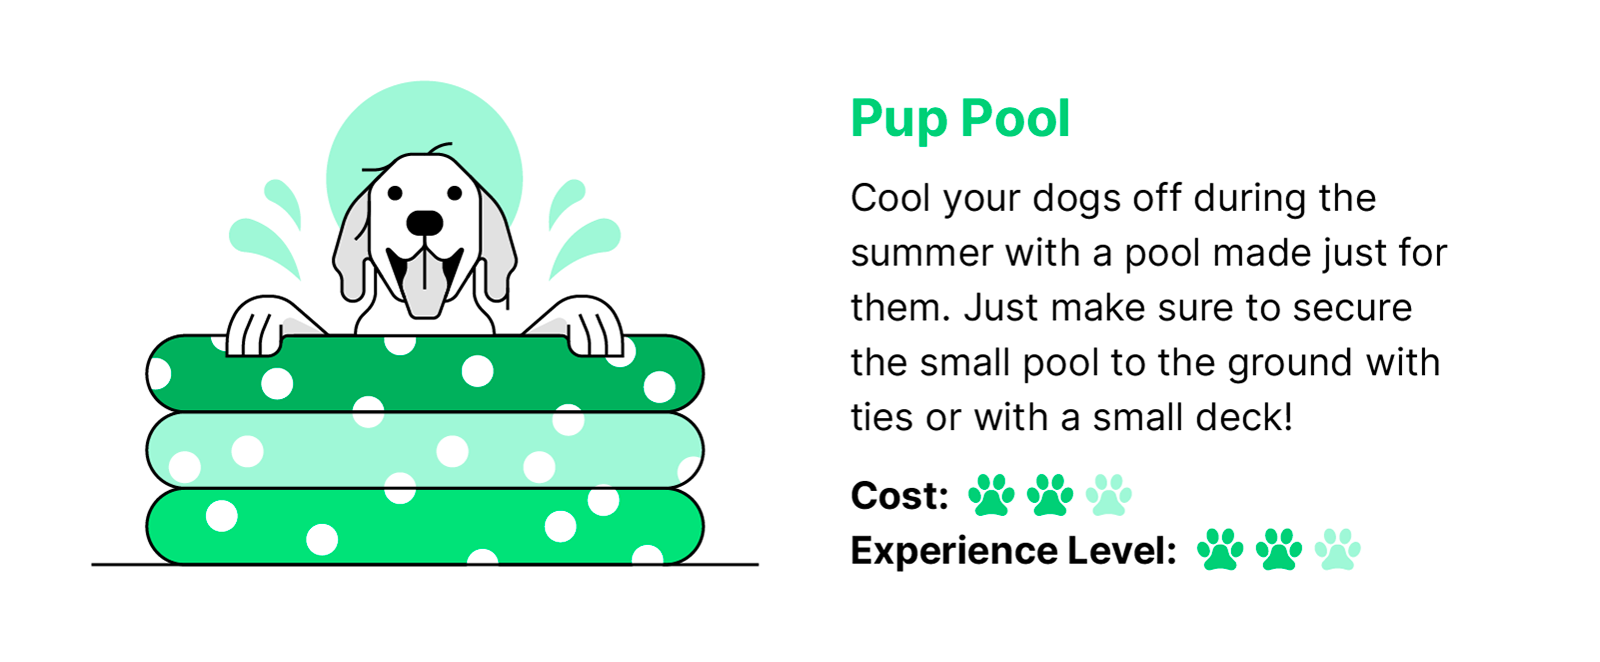 Green black and white illustration of a dog using a puppy pool with water splashing around with text